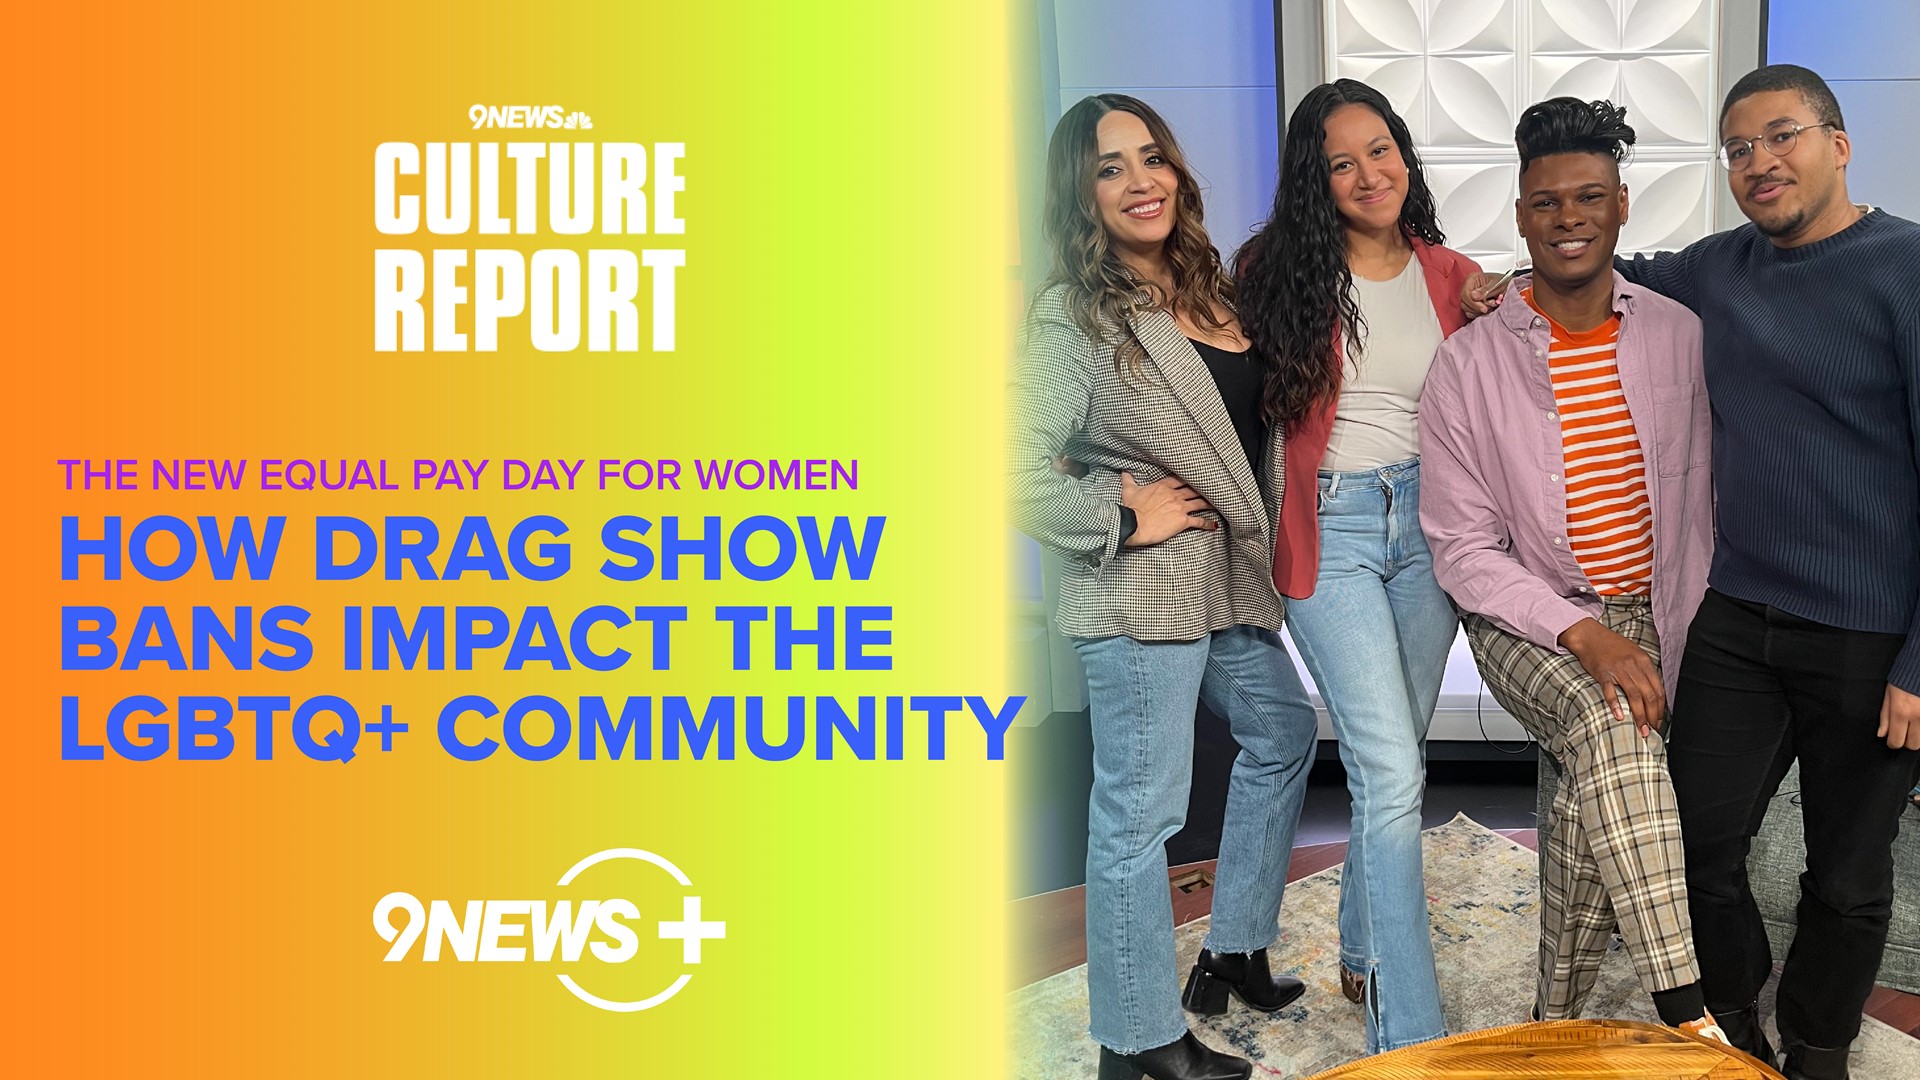 This week we discuss the new equal pay day for women and drag queen 'Lala' joins us to talk drag show bans across the country and the impact it has on LGBTQ+ people.